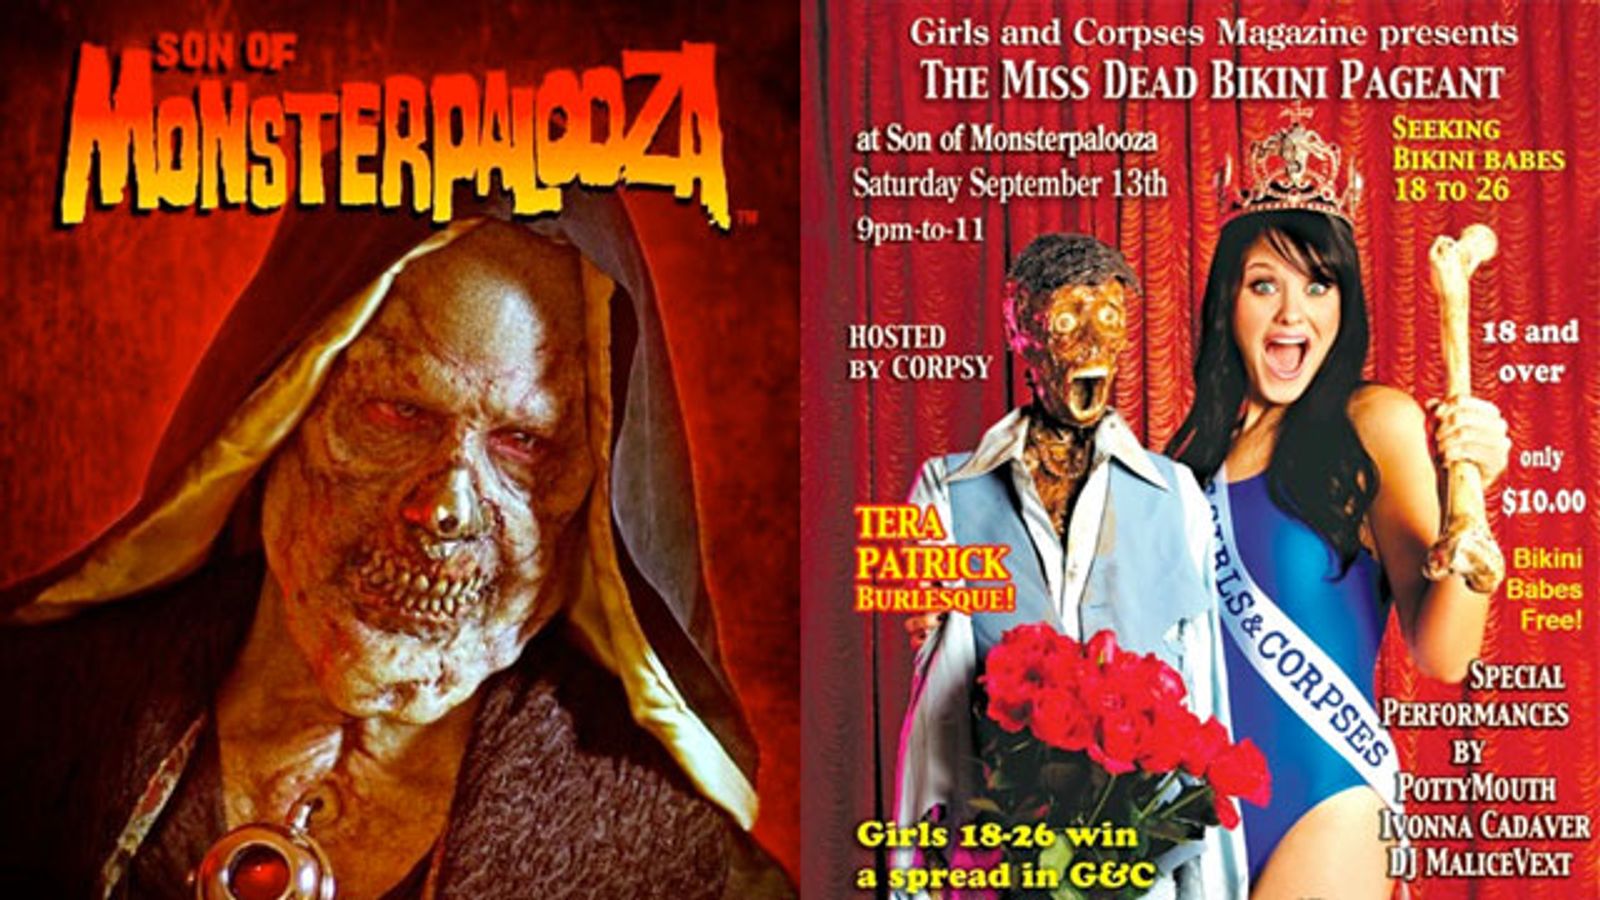 Tera Patrick, Girls and Corpses Crew Appearing at Miss Dead Bikini Pageant